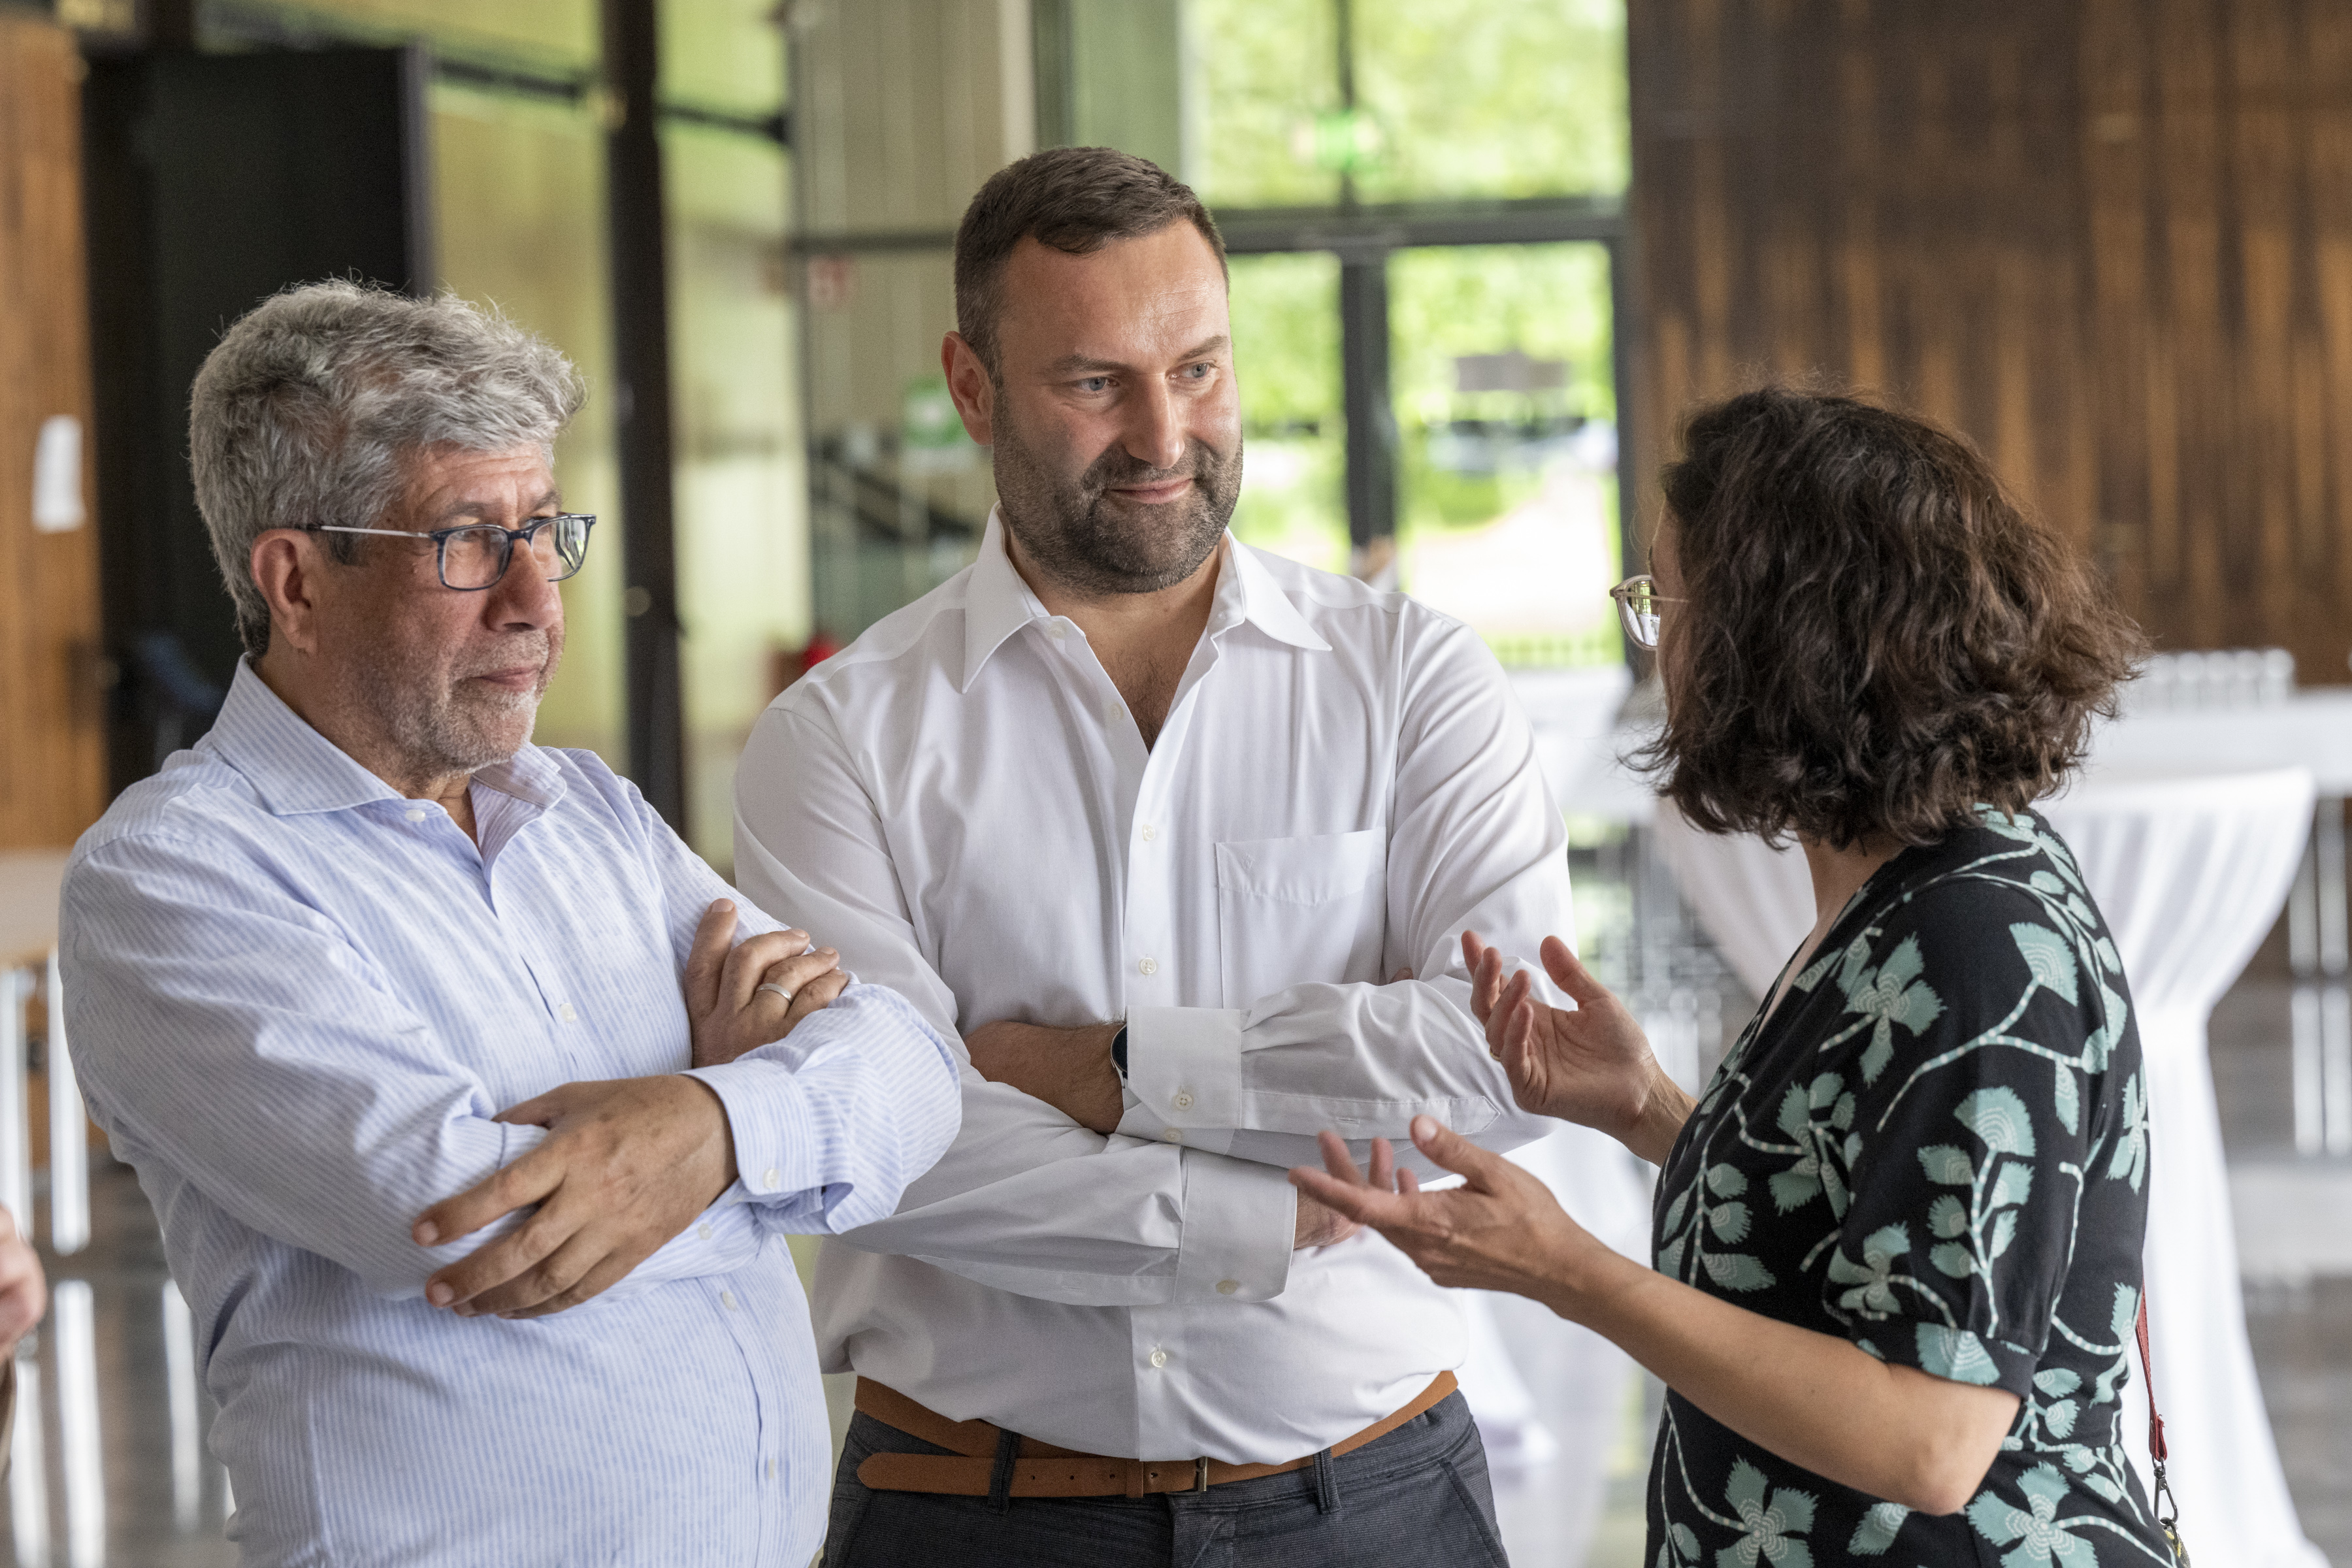 Ahmet Sezer (DOMiD board member) and Timo Glatz (Head of Marketing & Communication at DOMiD) in conversation with DOMiD board member Elif Şenel. photo: Uwe Weiser / LVR